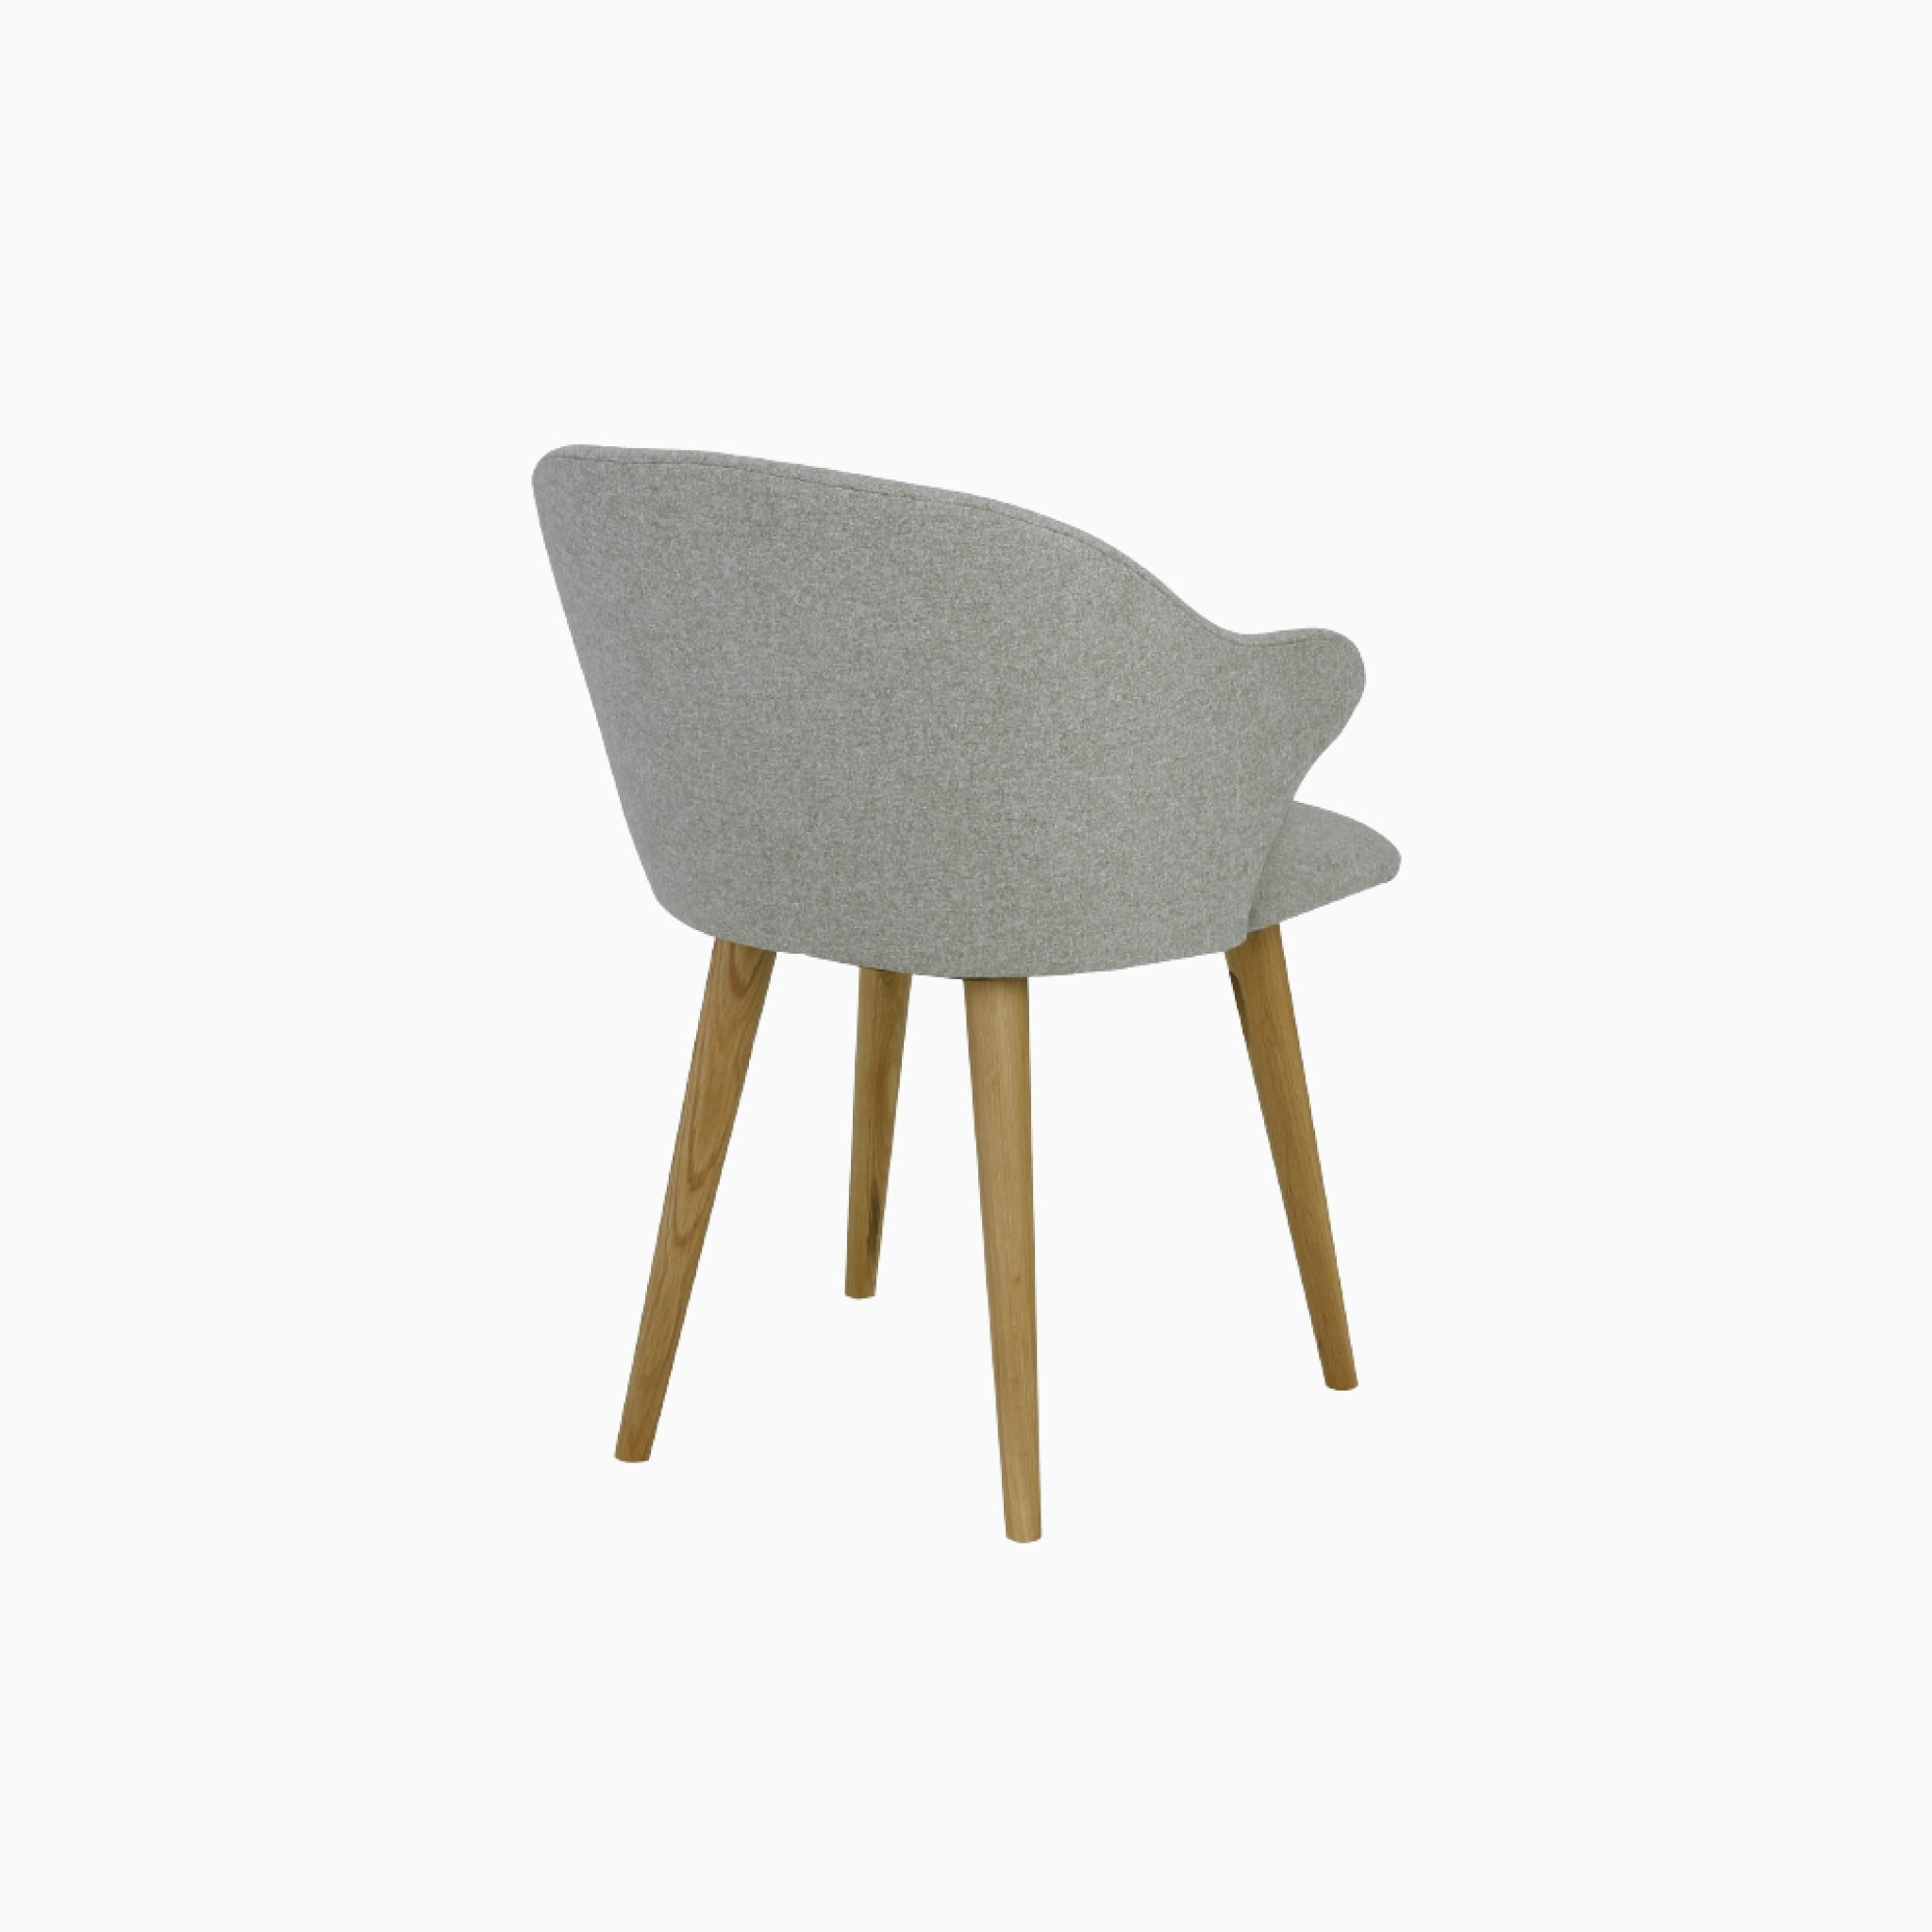 Lumo Grey Dining Chair with Oak Leg (Set of 2)